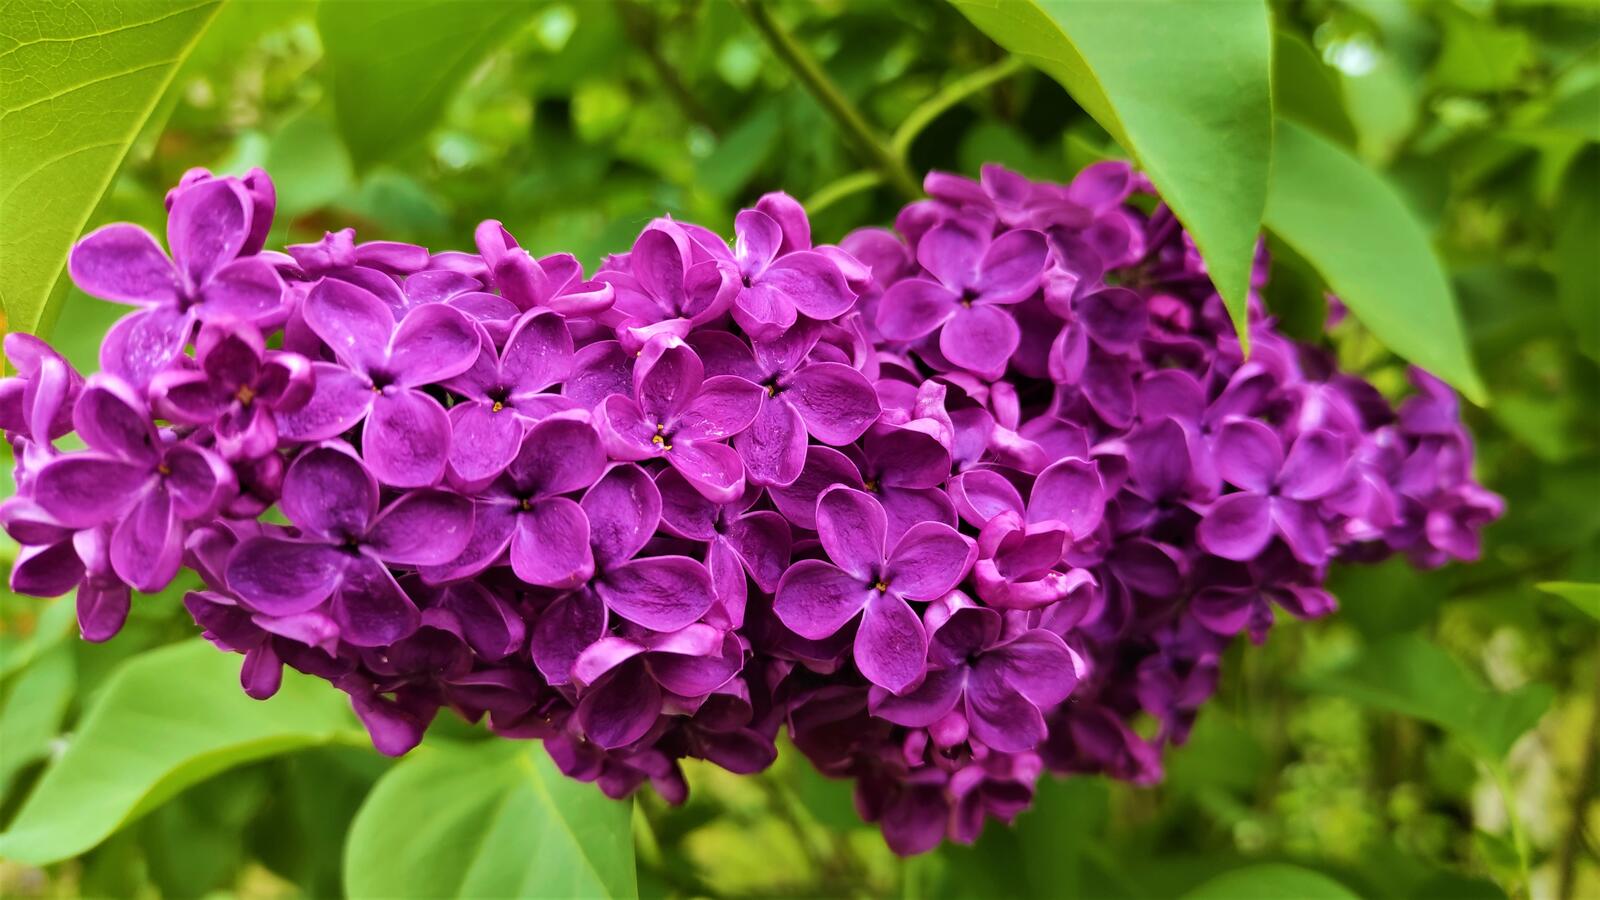 Wallpapers nature flowers lilacs on the desktop